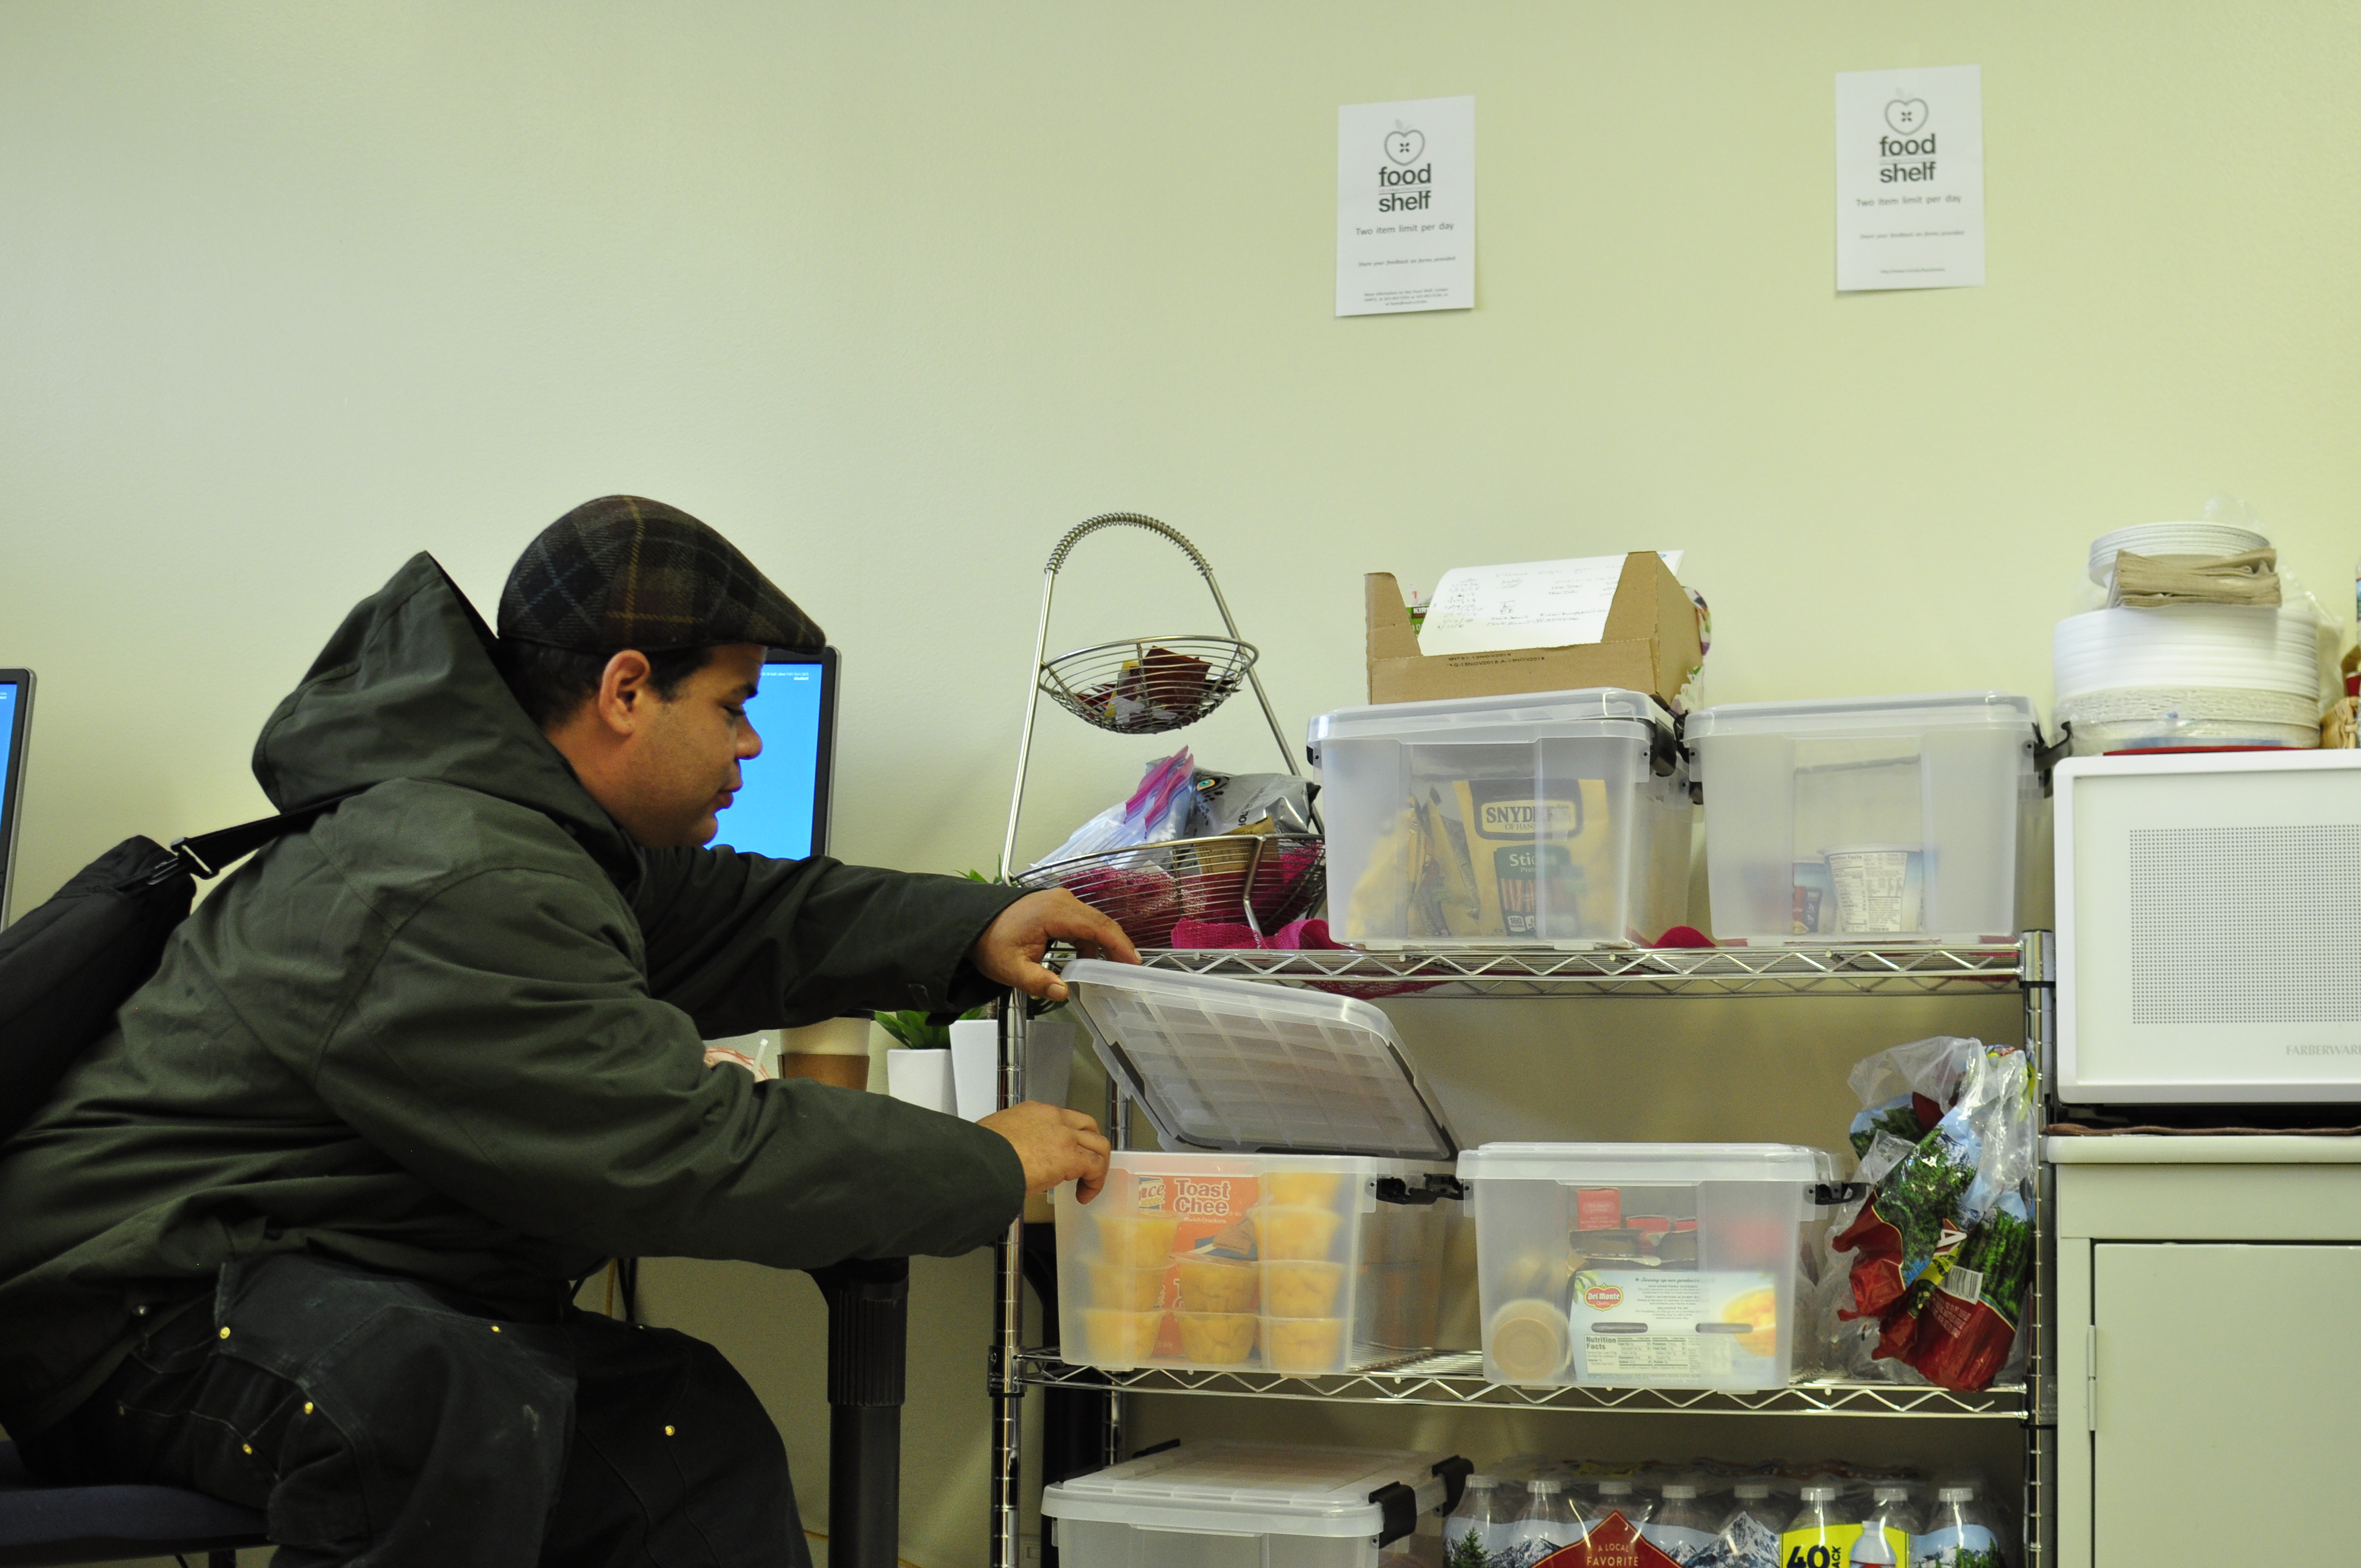 Mark Dennis a Forestry and Sustainability major student comes to the H.A.R.T.S (Homeless At Risk Transitional Students) office twice a day everyday to get a snack. January 18, 2018. (Photo/Janeth R. Sanchez)